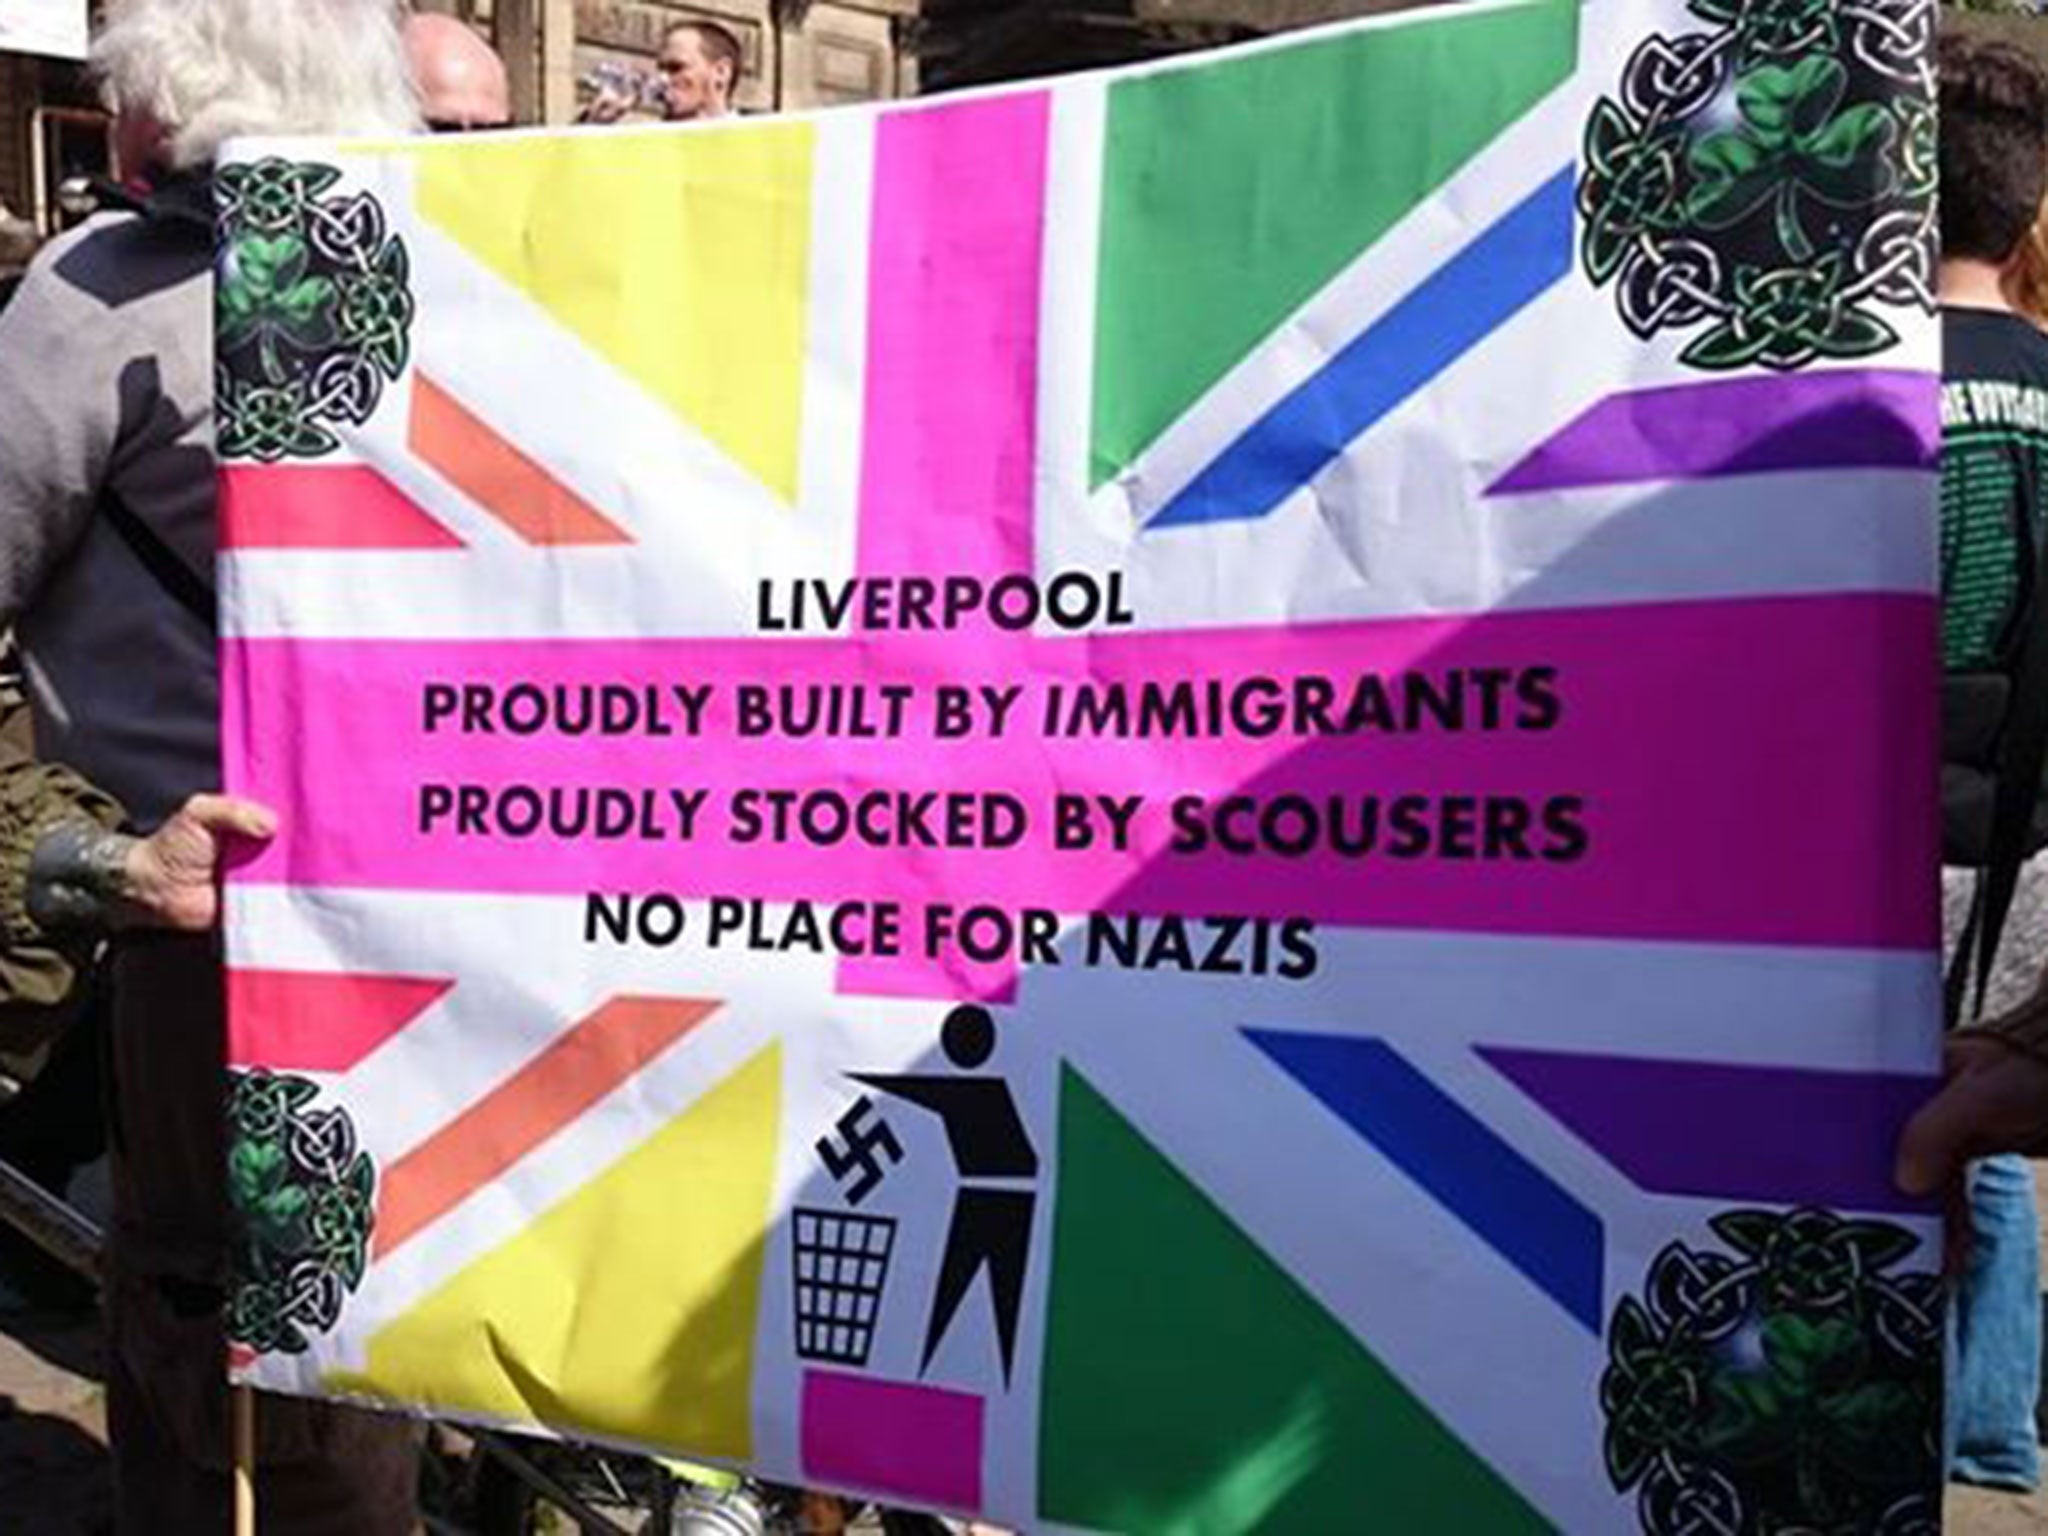 Anti-Fascism protestors staged a counter rally in the city